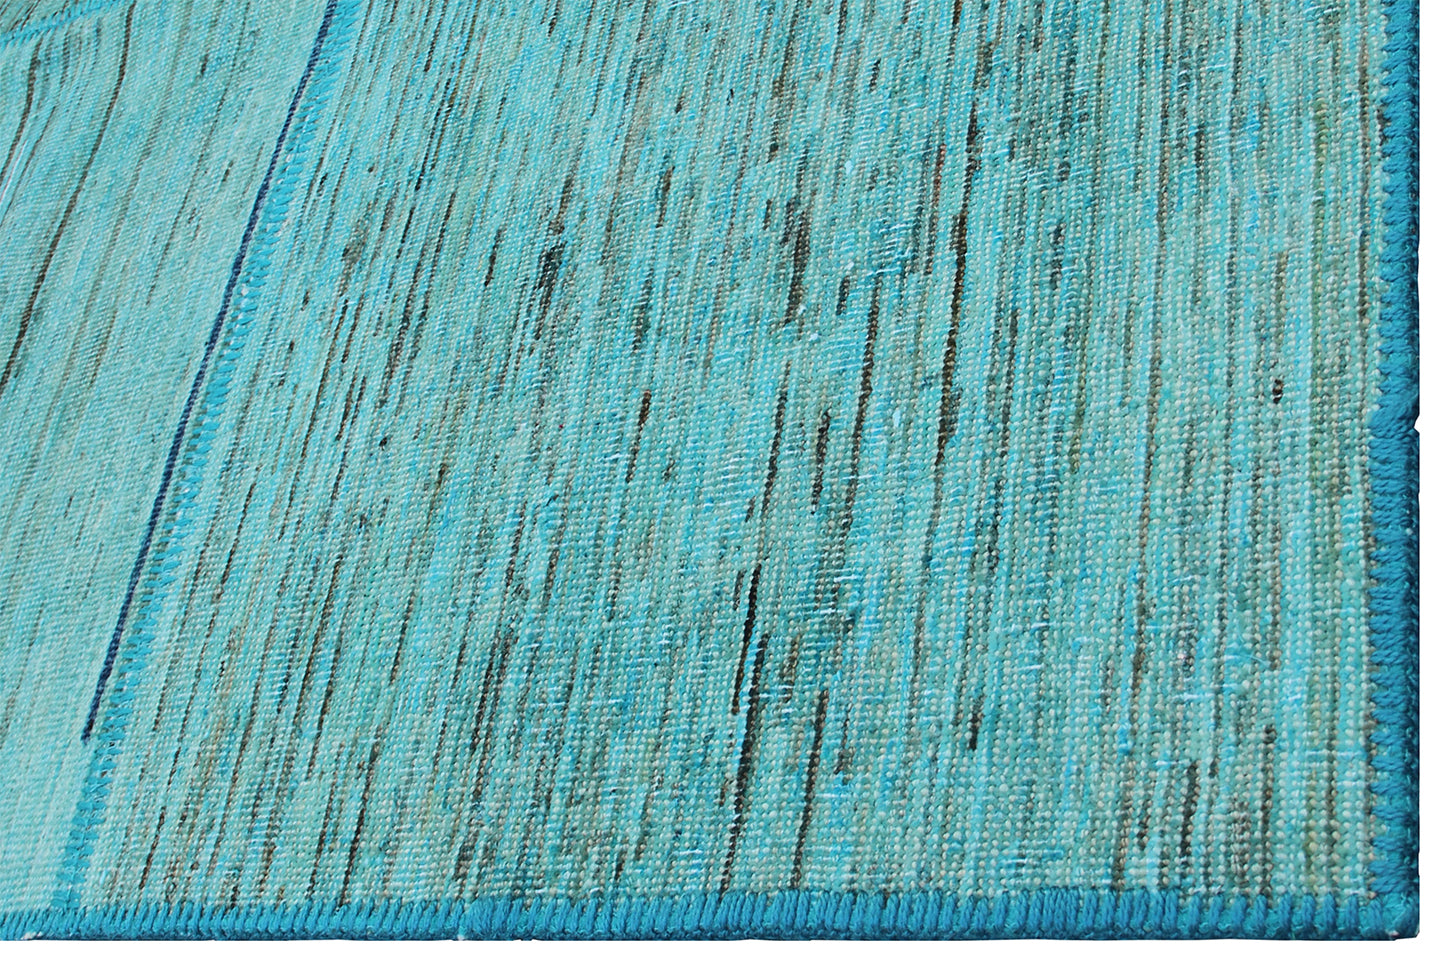 6'x8' Turquoise Blue Patchwork Overdye Wool Rug